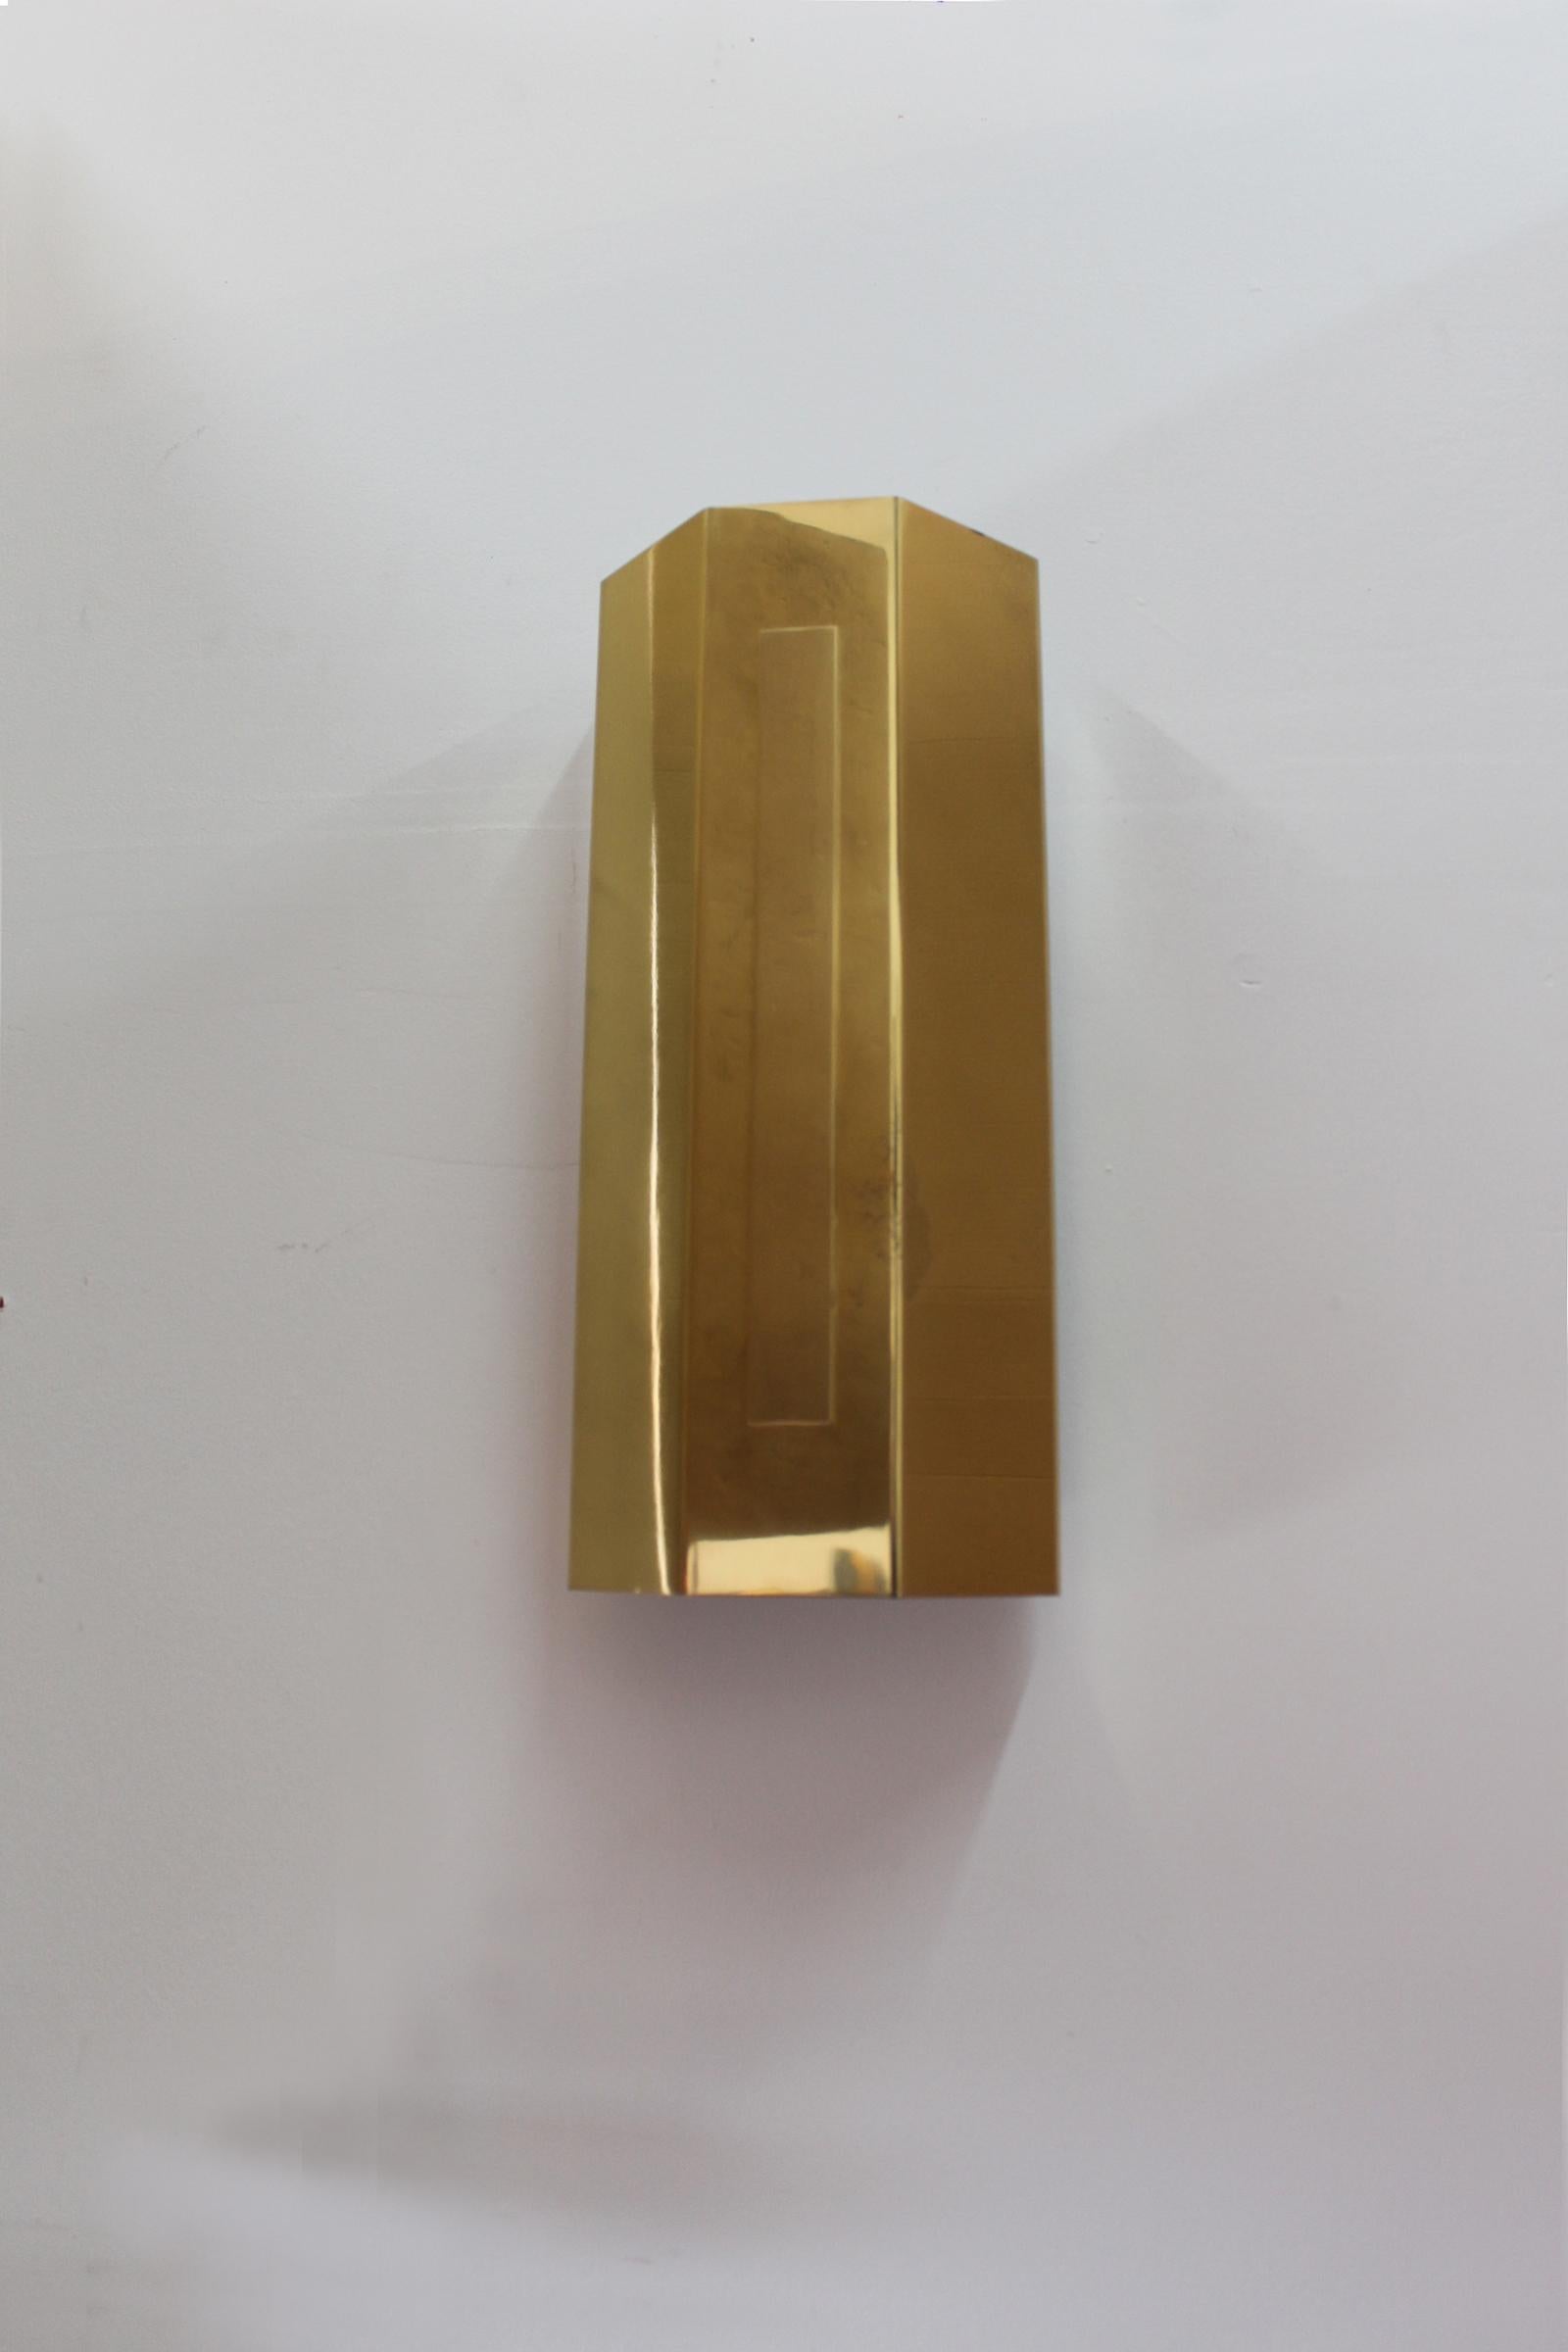 Jean Perzel (1892-1986): Nine rare French 1970s polished bronze sconces.
This model was especially created for 